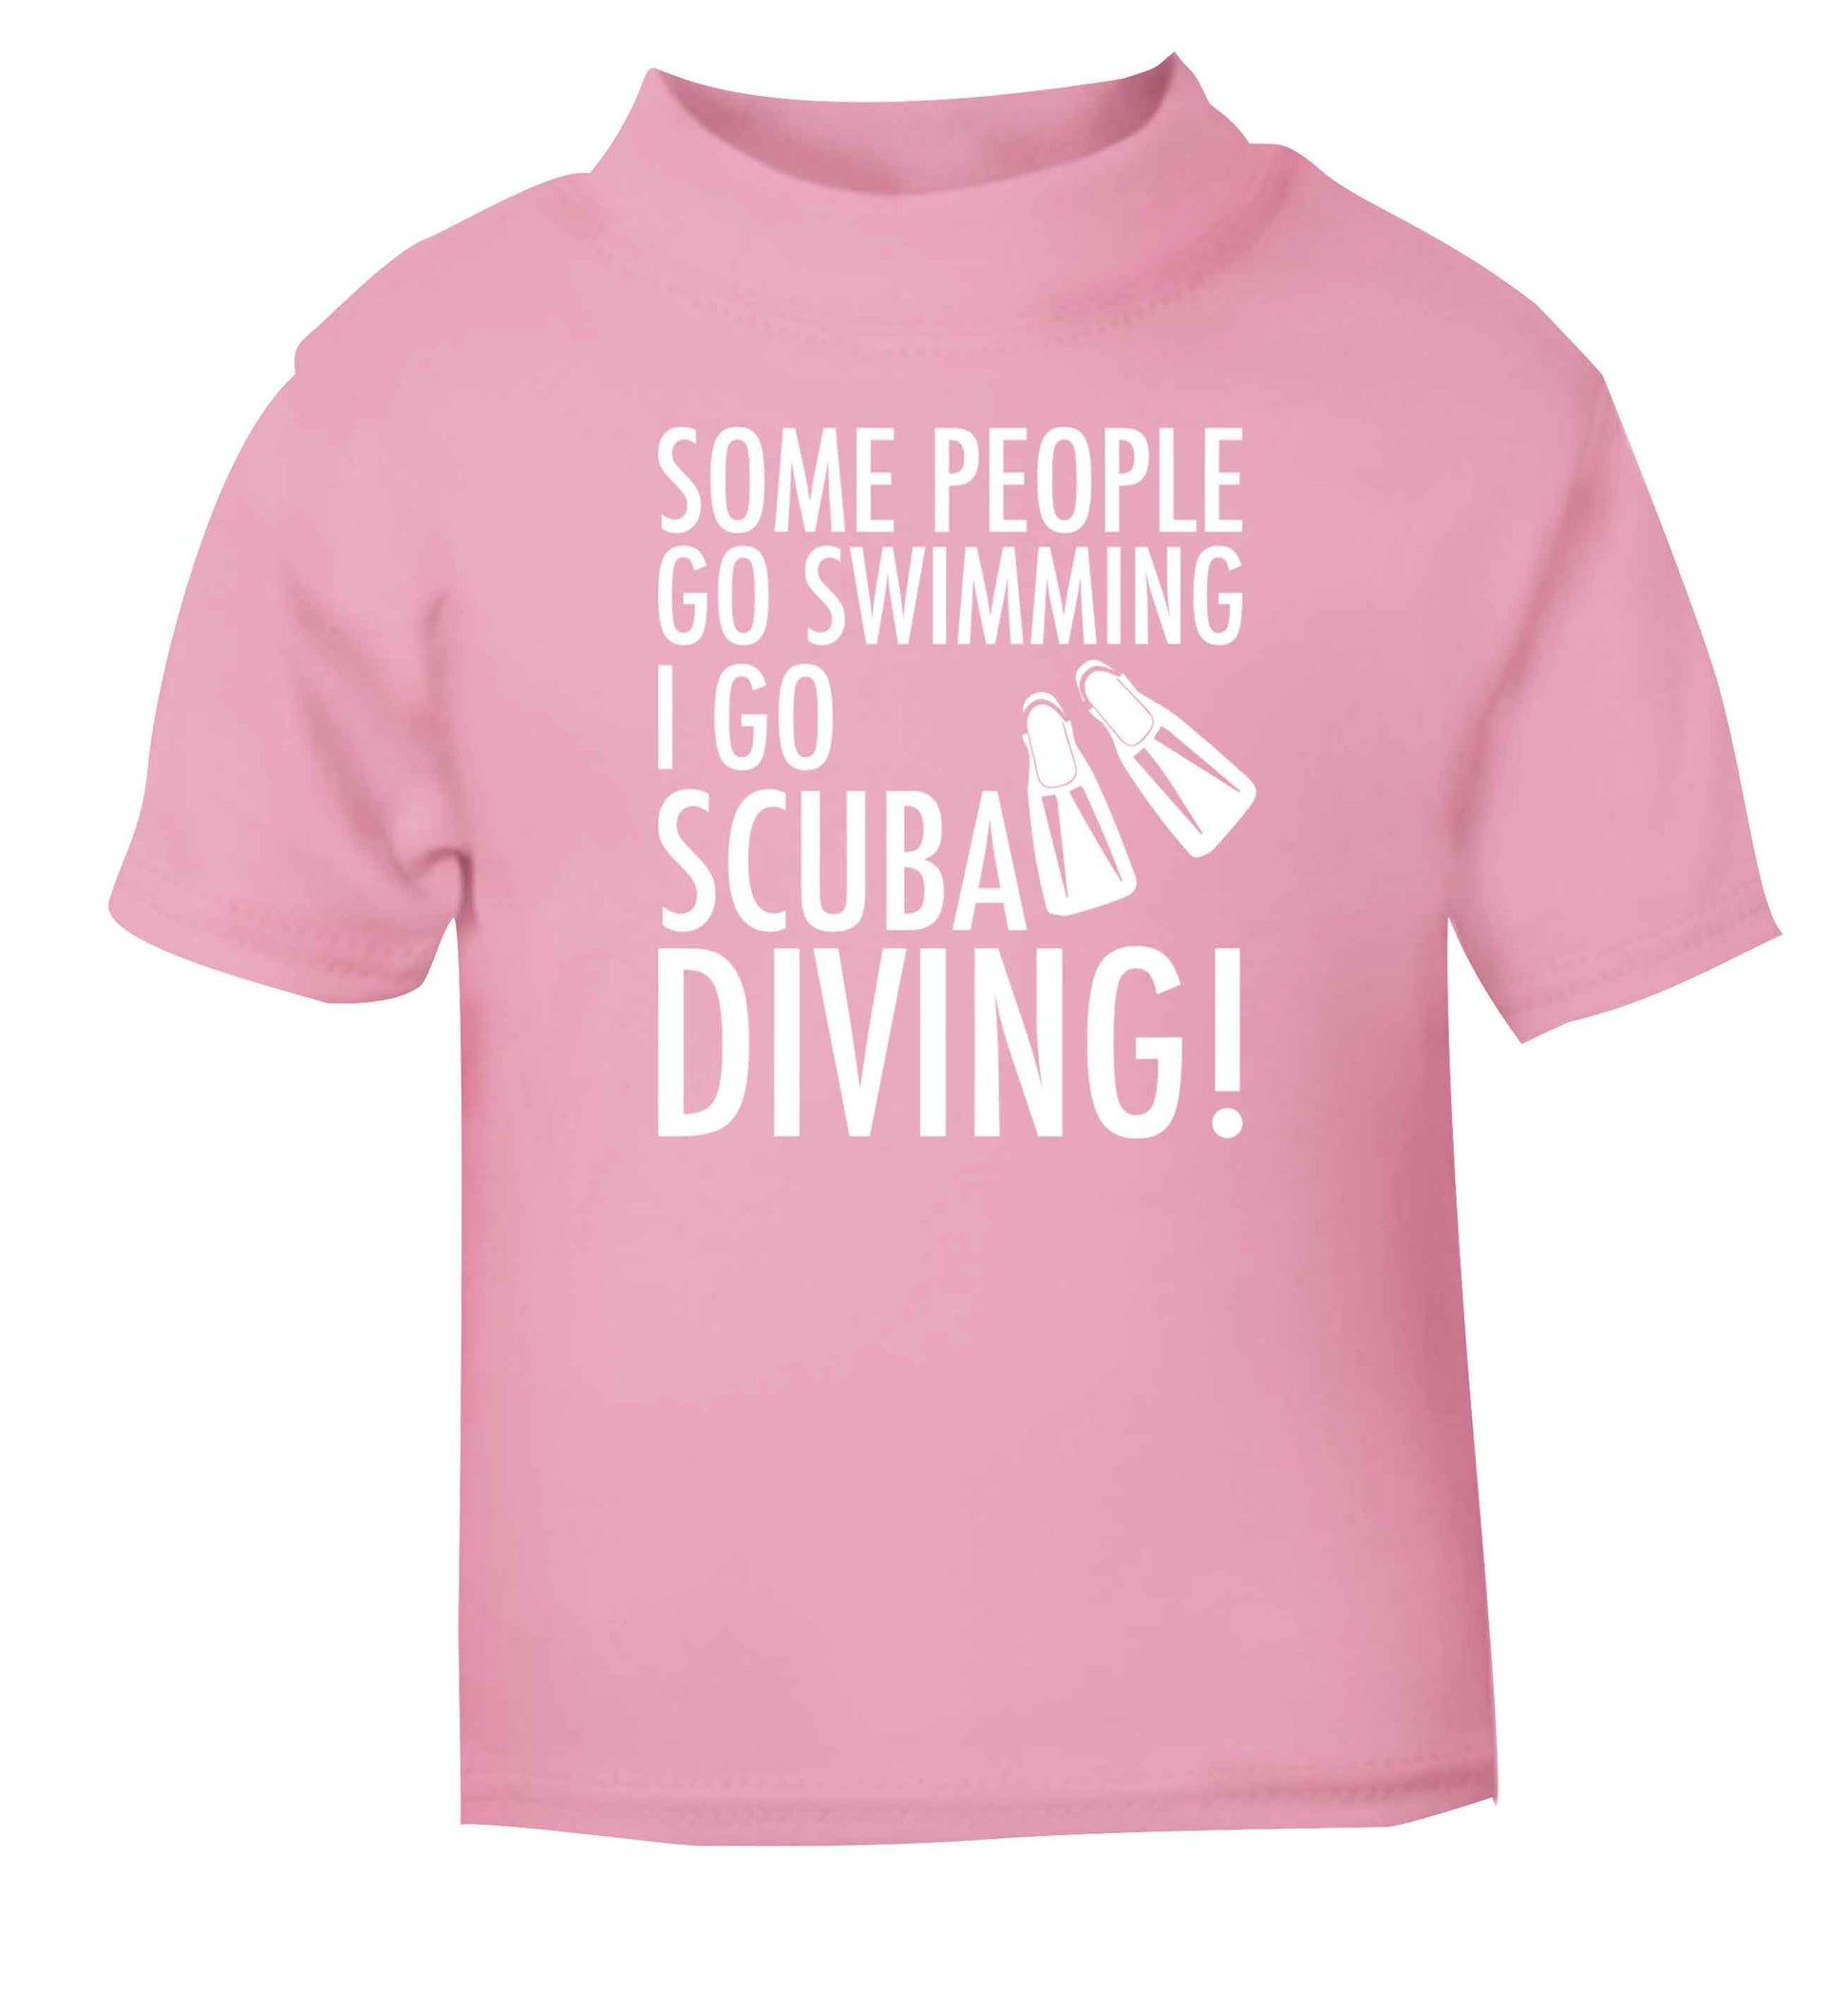 Some people go swimming I go scuba diving! light pink Baby Toddler Tshirt 2 Years